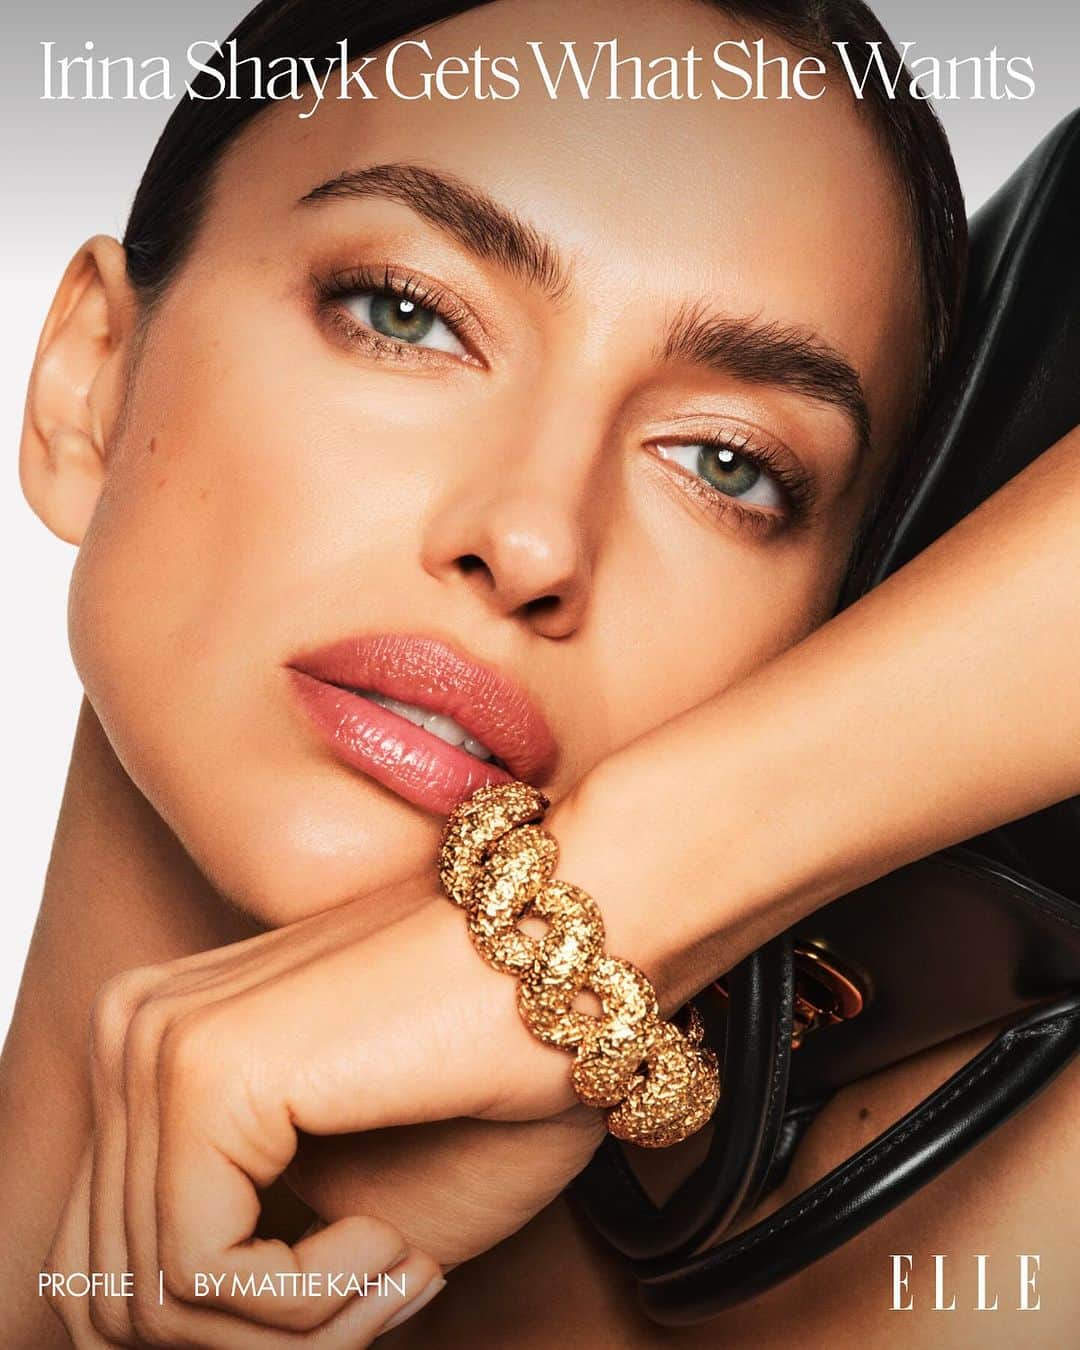 ELLE Magazineのインスタグラム：「The first time supermodel #IrinaShayk set foot on an airplane, she was almost 20 years old. She moved into an apartment with a rotating cast of five or six other women and was given around 60 euros a week. She had few responsibilities and one real ambition: She wanted to earn at least €100. “I had agents who said, ‘You have to cut your hair, lose 20 pounds, and become blonde,’” she says. “And I was like, ‘Absolutely fucking no.’” She stuck to her guns and now she’s on top of the industry.   For ELLE’s November issue, Shayk shows off giftable accessories and, in a rare interview, reflects on how far she’s come. Tap the link in bio to read her interview.   ELLE: @elleusa Editor-in-chief: Nina Garcia @ninagarcia Photographer: Dan Jackson @studio_jackson Stylist: Alex White @alexwhiteedits Writer: Mattie Kahn @matkahn Hair: Bob Recine at The Wall Group @bobrecine @thewallgroup Makeup: Fulvia Farolfi for Chanel Beauty @fulviafarolfi @chanel.beauty Manicure: Rica Romain at Statement Artists @ricaromain @statementartists Production: Travis Kiewel at That One Production @traviskiewel @thatoneproduction」